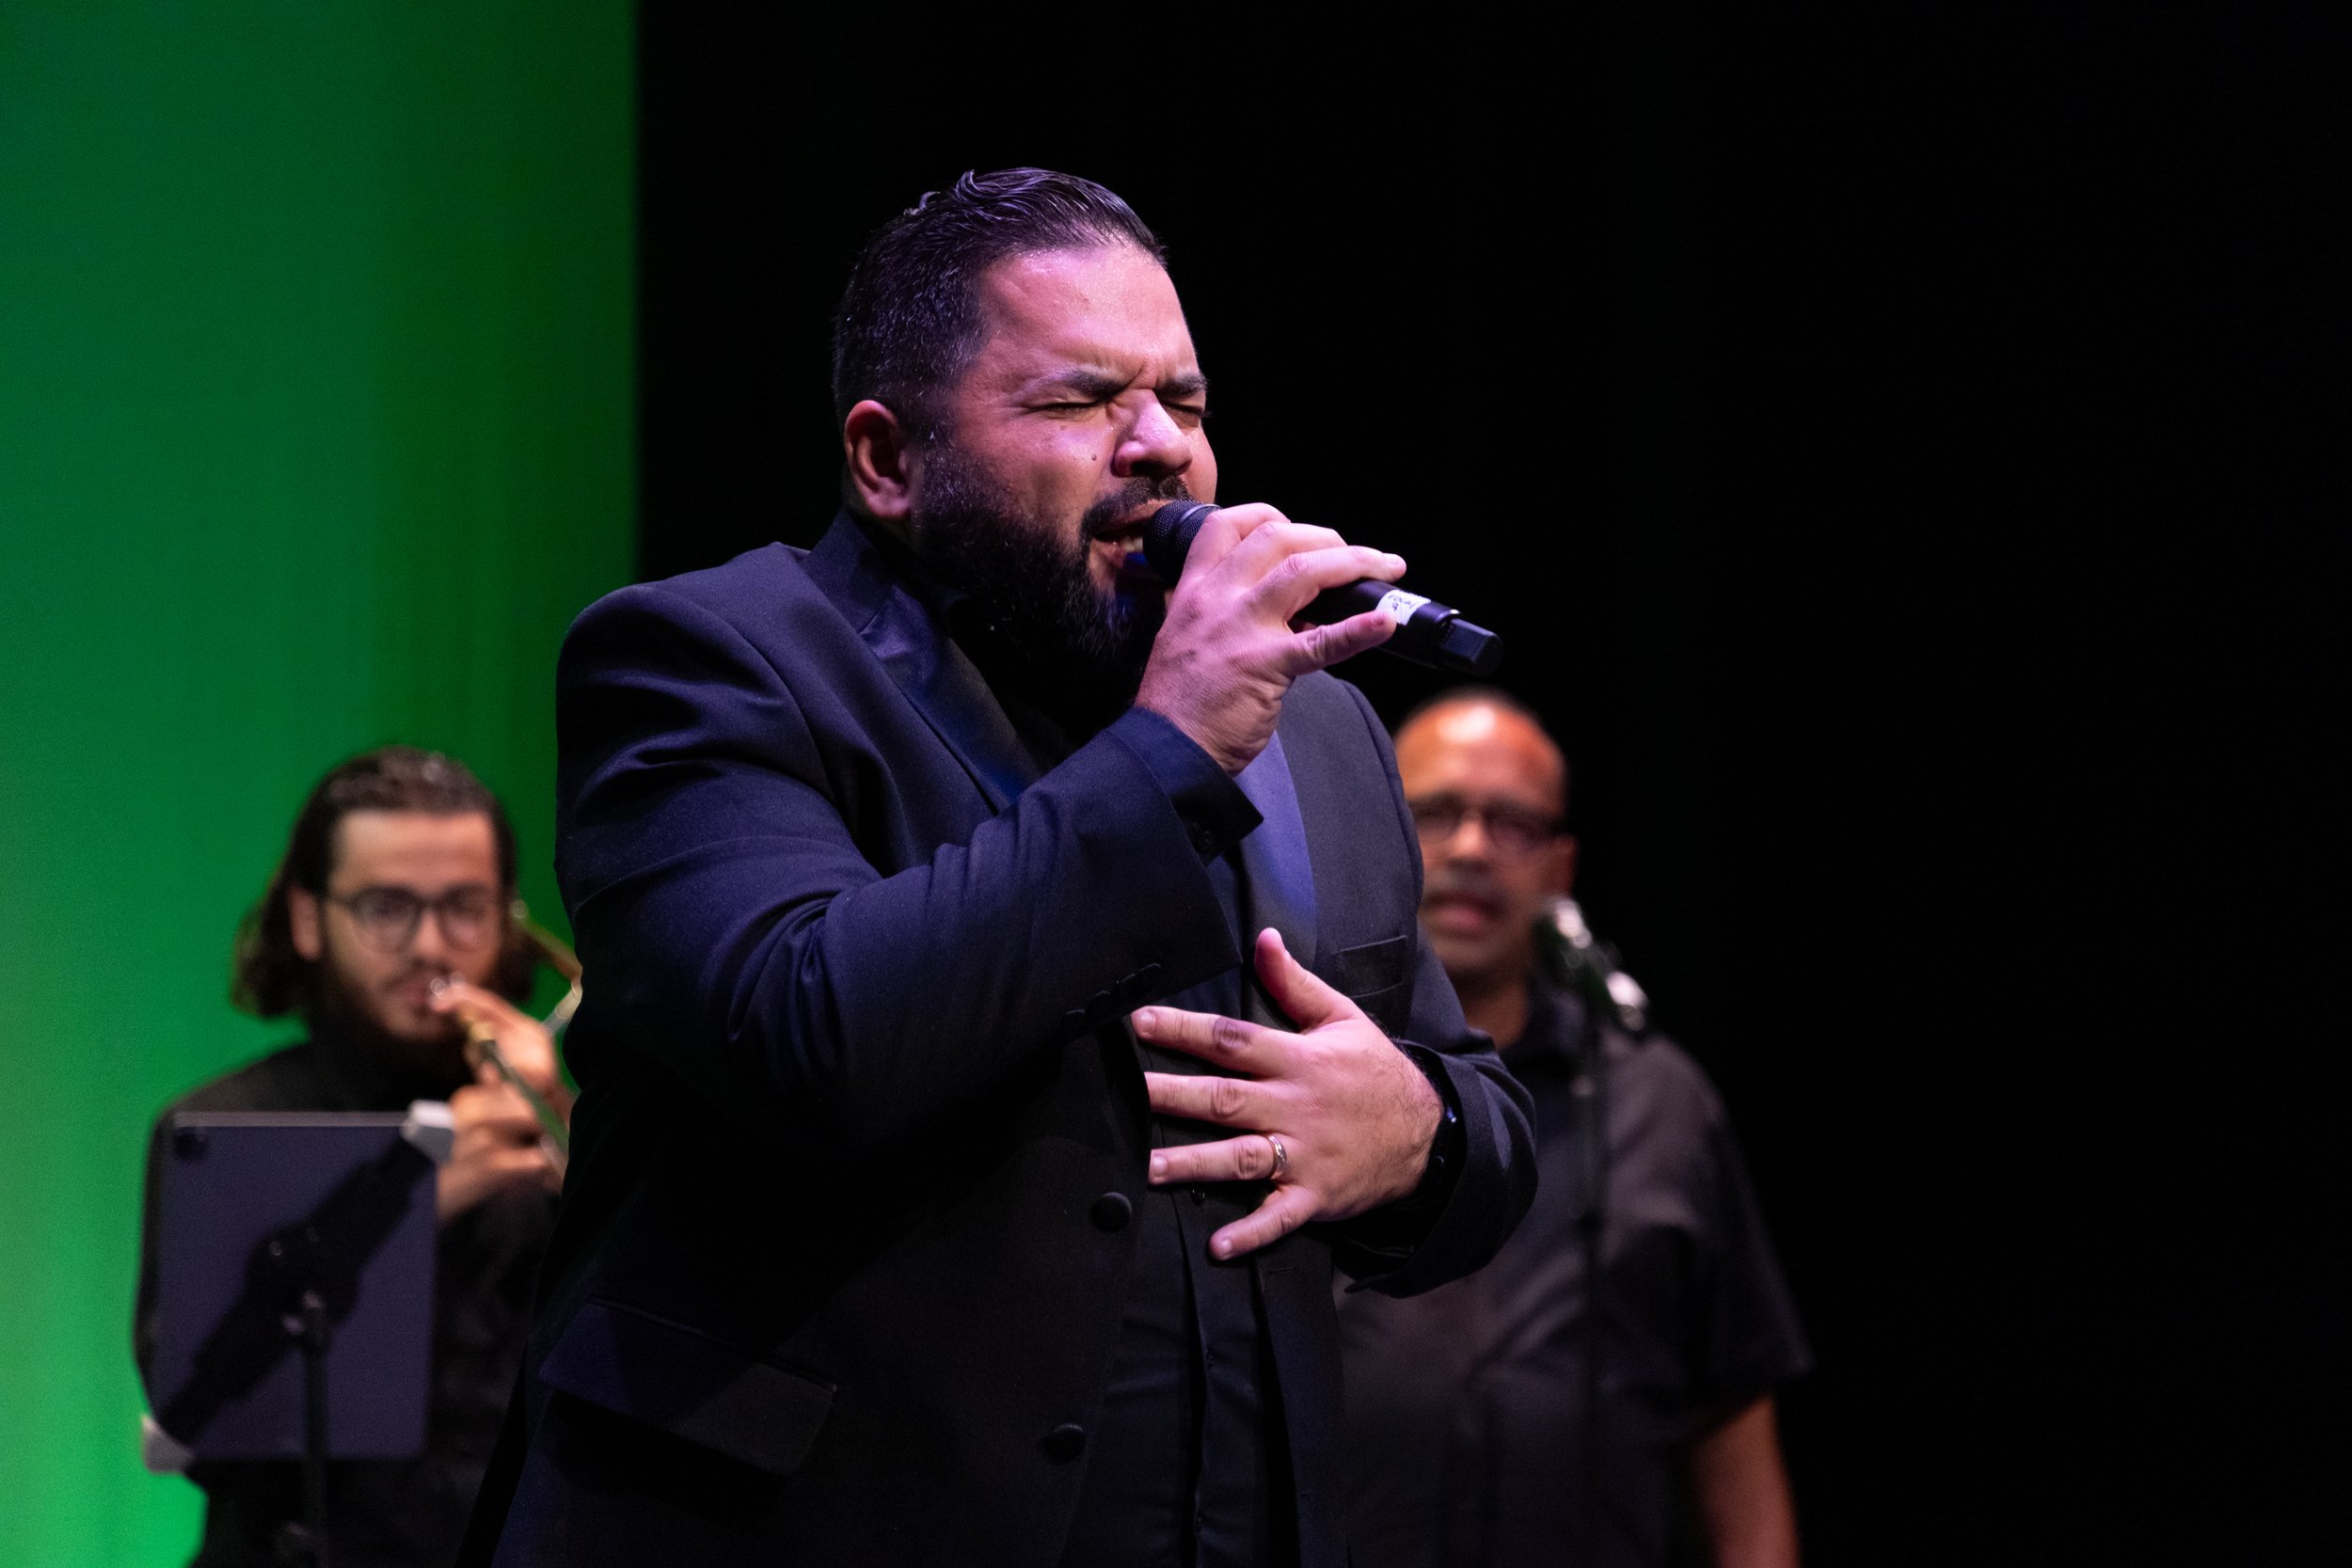  Puchi Colón and his band performed “Salsa Praise,” an arrangement of “I Can Only Imagine” with a fun, Latin twist.  